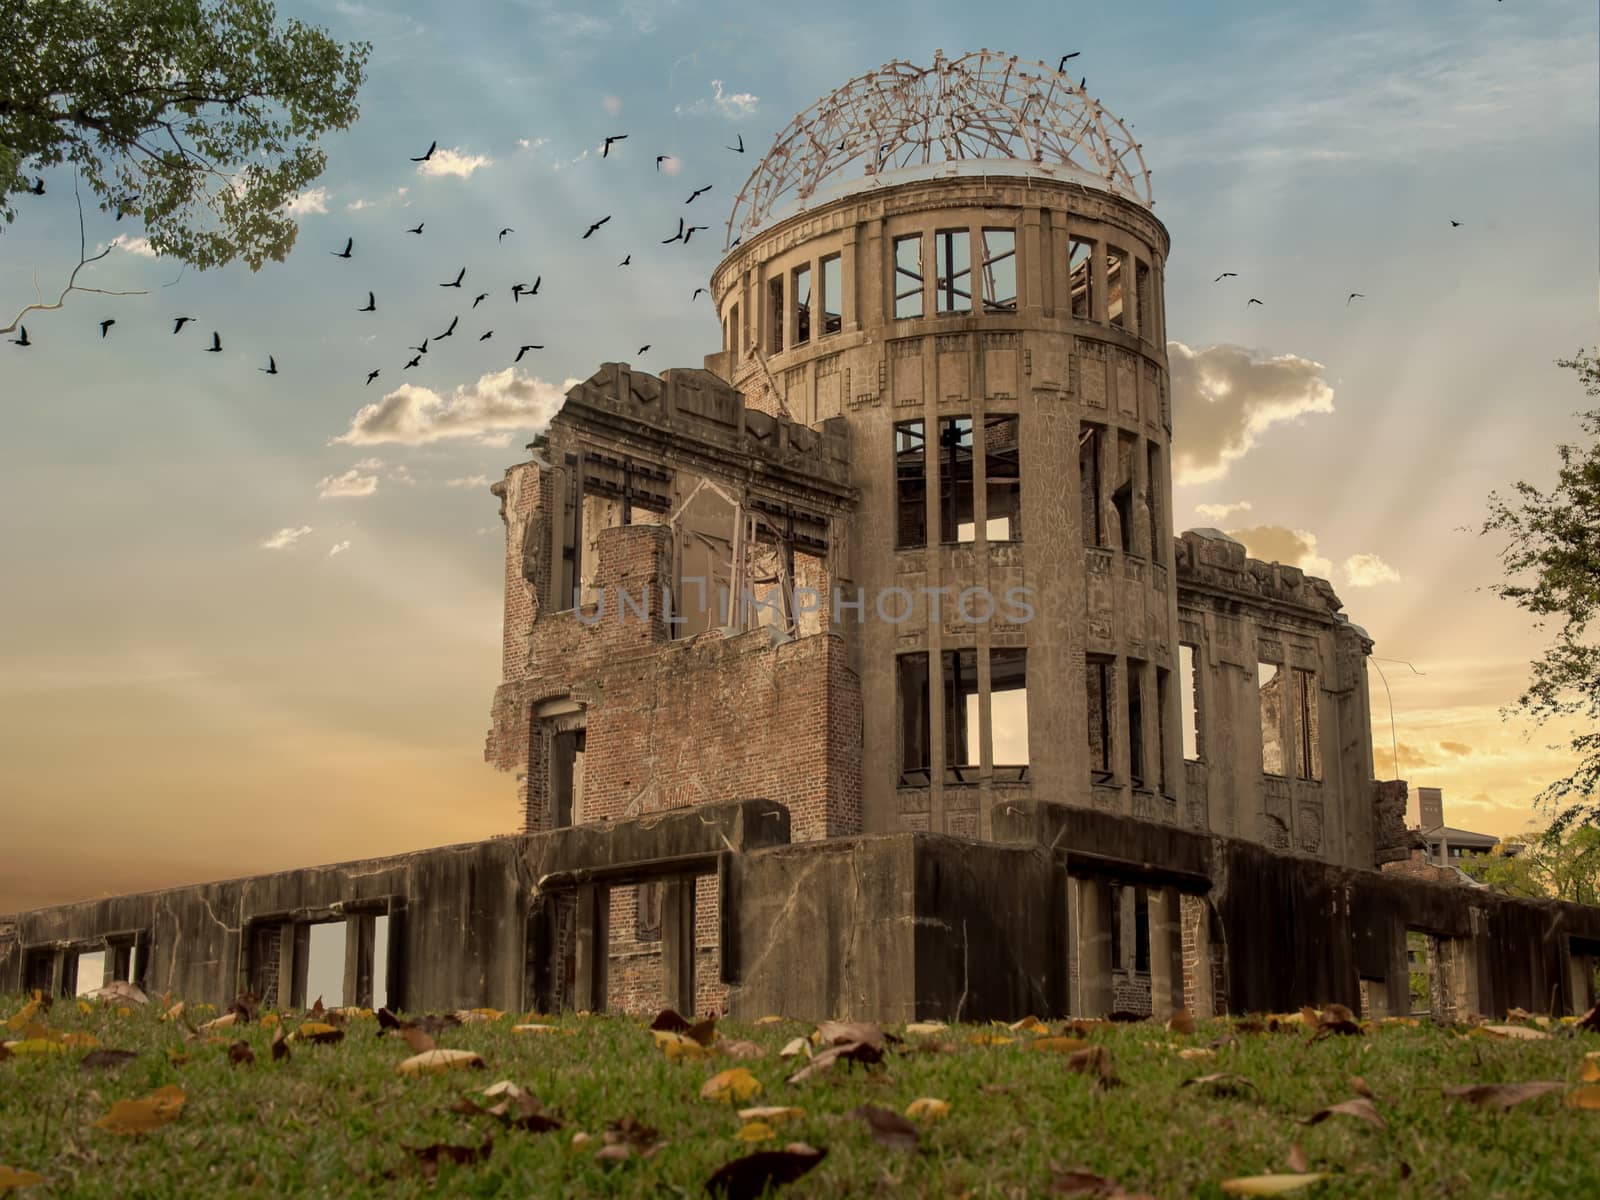 hiroshima atomic bomb dome by zkruger